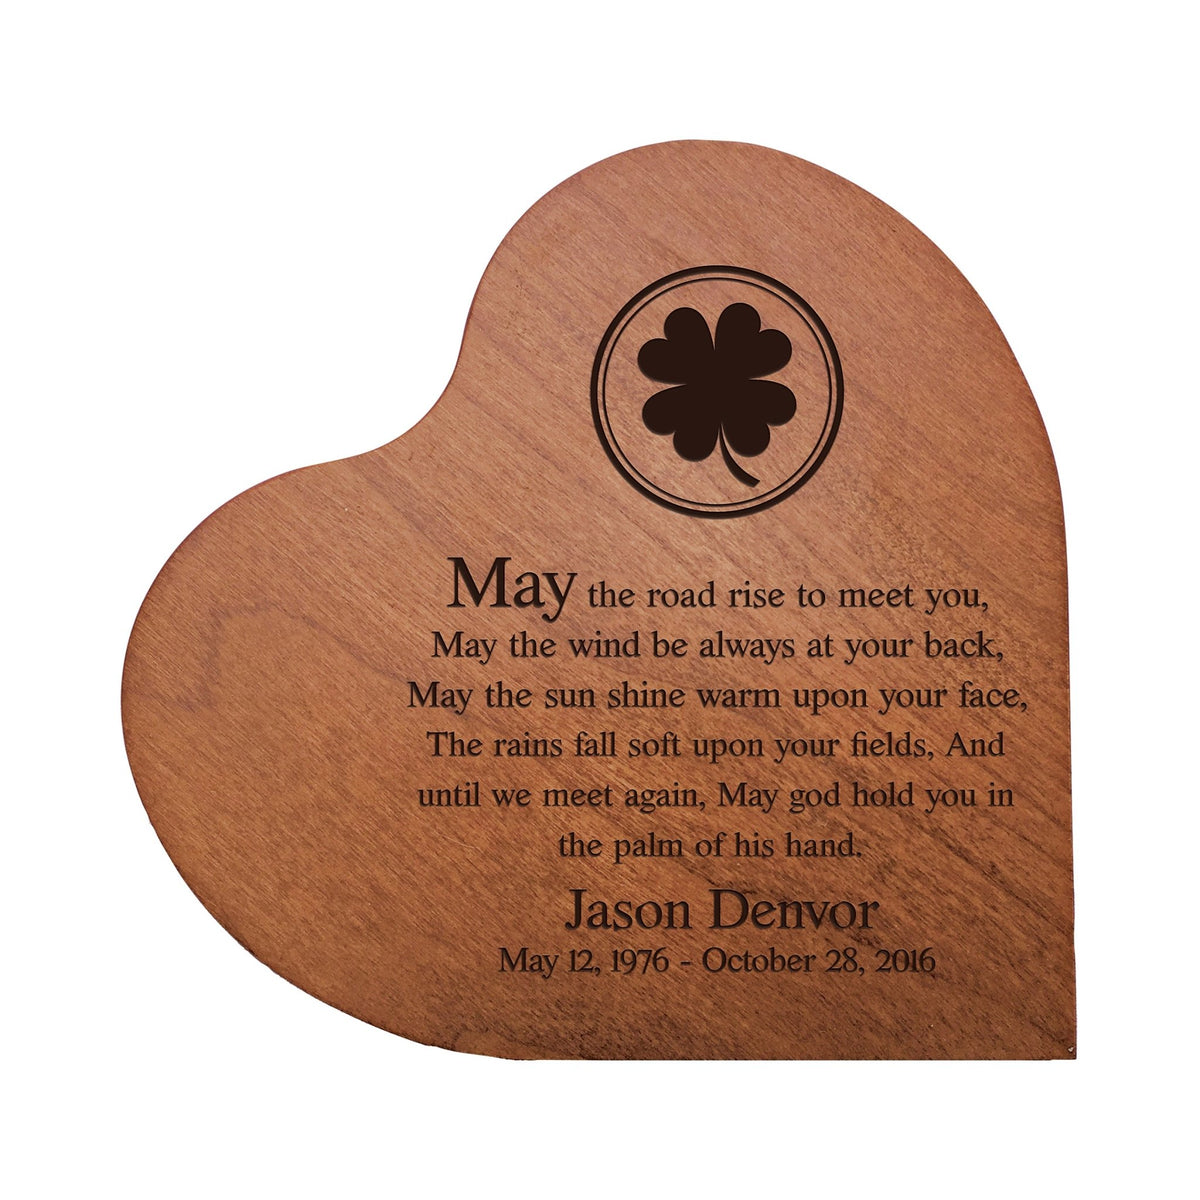 Engraved Wooden Heart Block 5” x 5.25” x 0.75” - May The Road Rise To Meet You - LifeSong Milestones